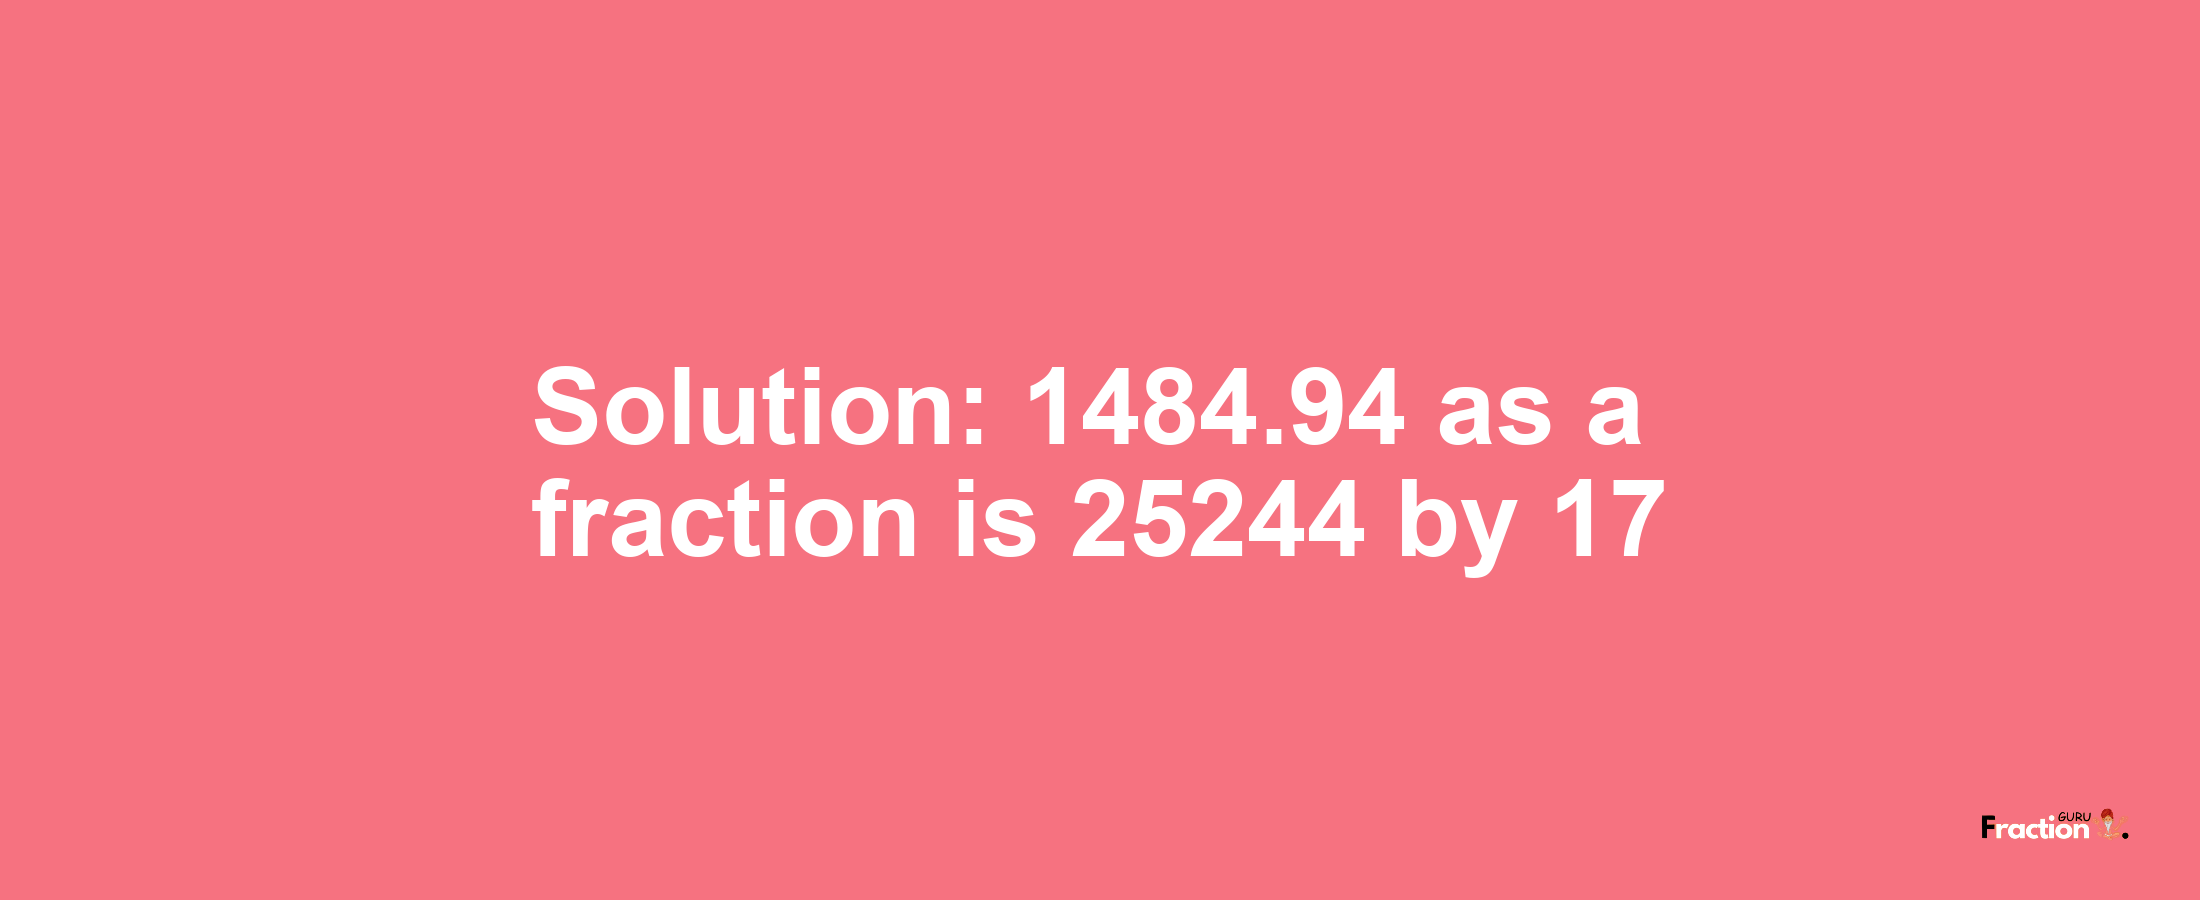 Solution:1484.94 as a fraction is 25244/17